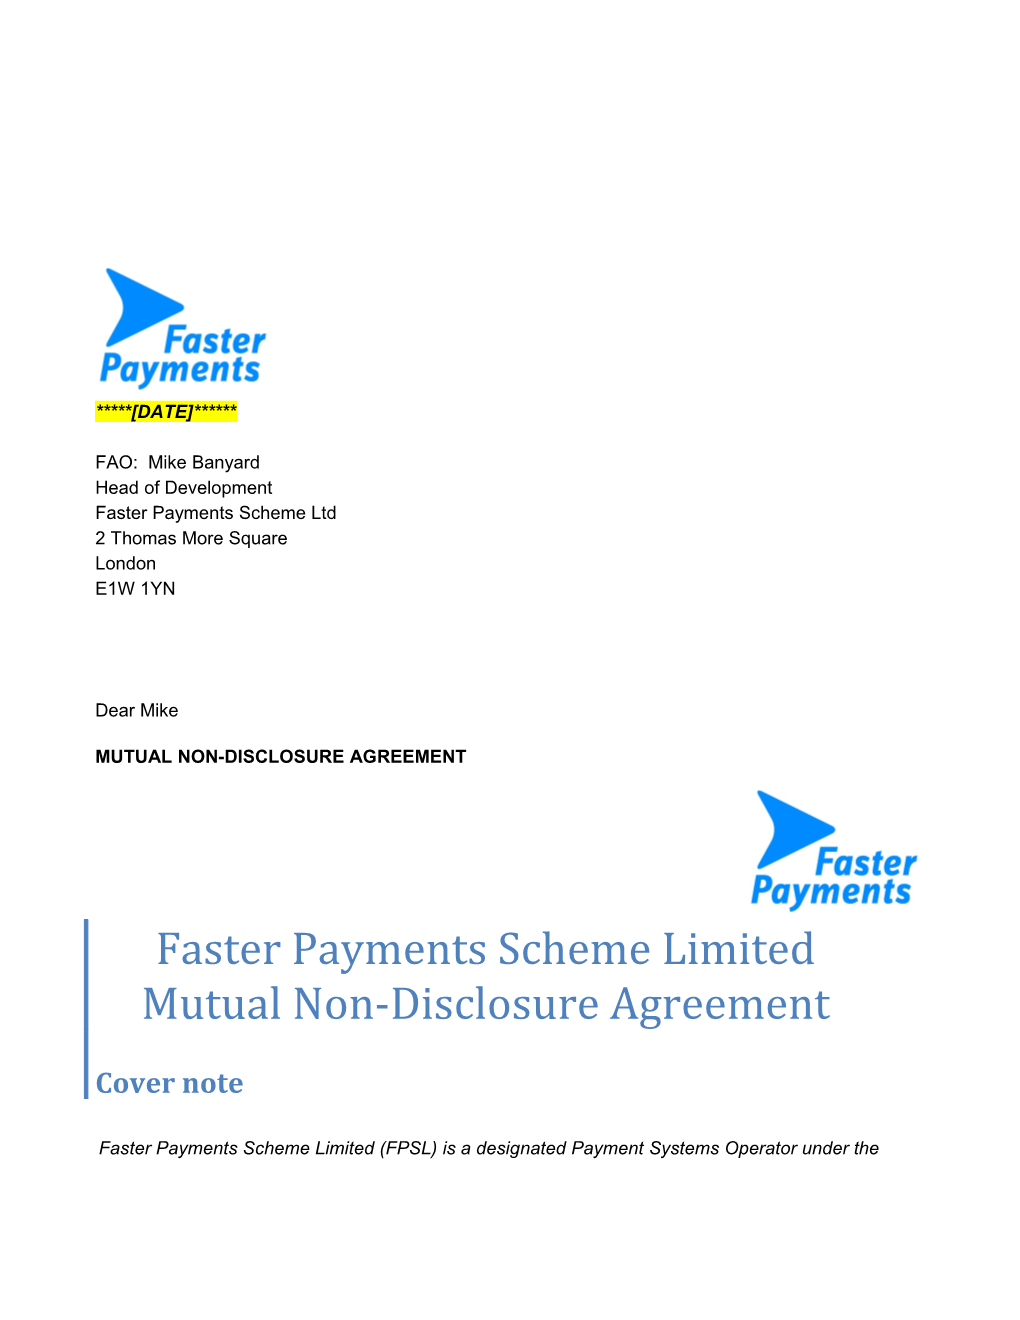 Faster Payments Scheme Limited Mutual Non-Disclosure Agreement